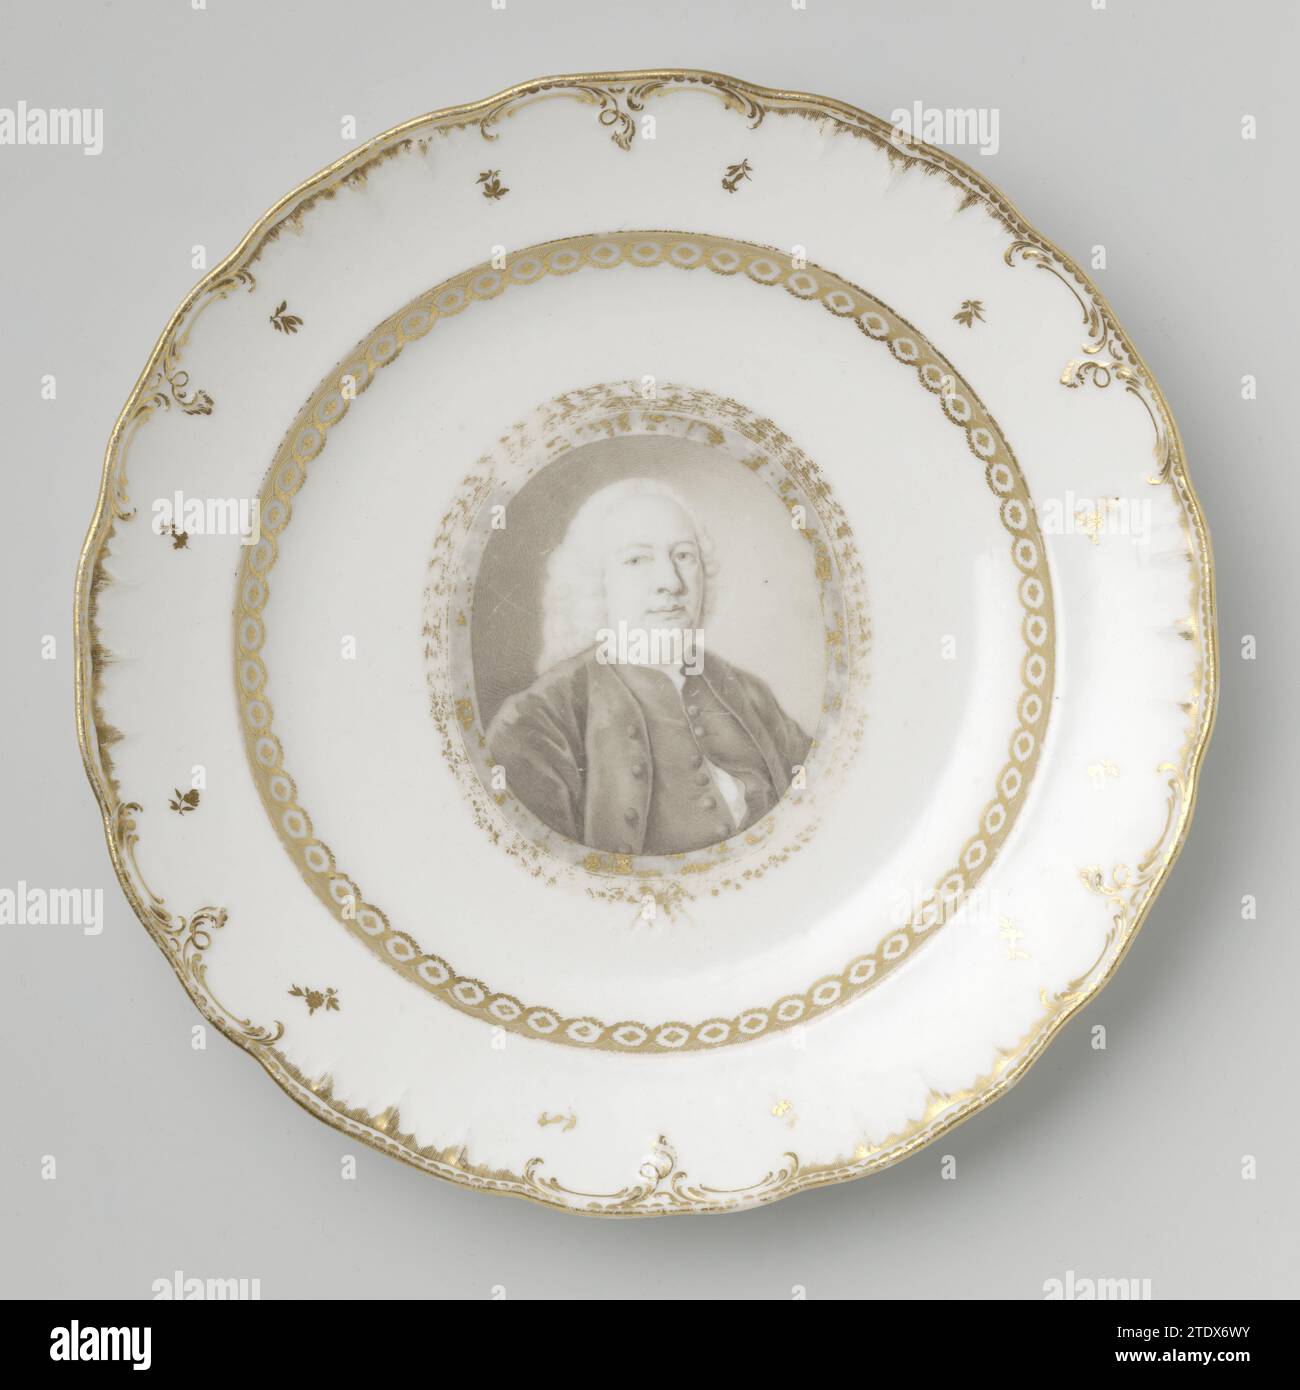 Saucer or plate with Jacob Gilles mr. 1772 - c. 1784 Plate (?) From porcelain. Painted in brown with a portrait of Mr. Jacob Gilles. Around decorated edges and sprinkling flowers. Loosdrecht porcelain Plate (?) From porcelain. Painted in brown with a portrait of Mr. Jacob Gilles. Around decorated edges and sprinkling flowers. Loosdrecht porcelain Stock Photo